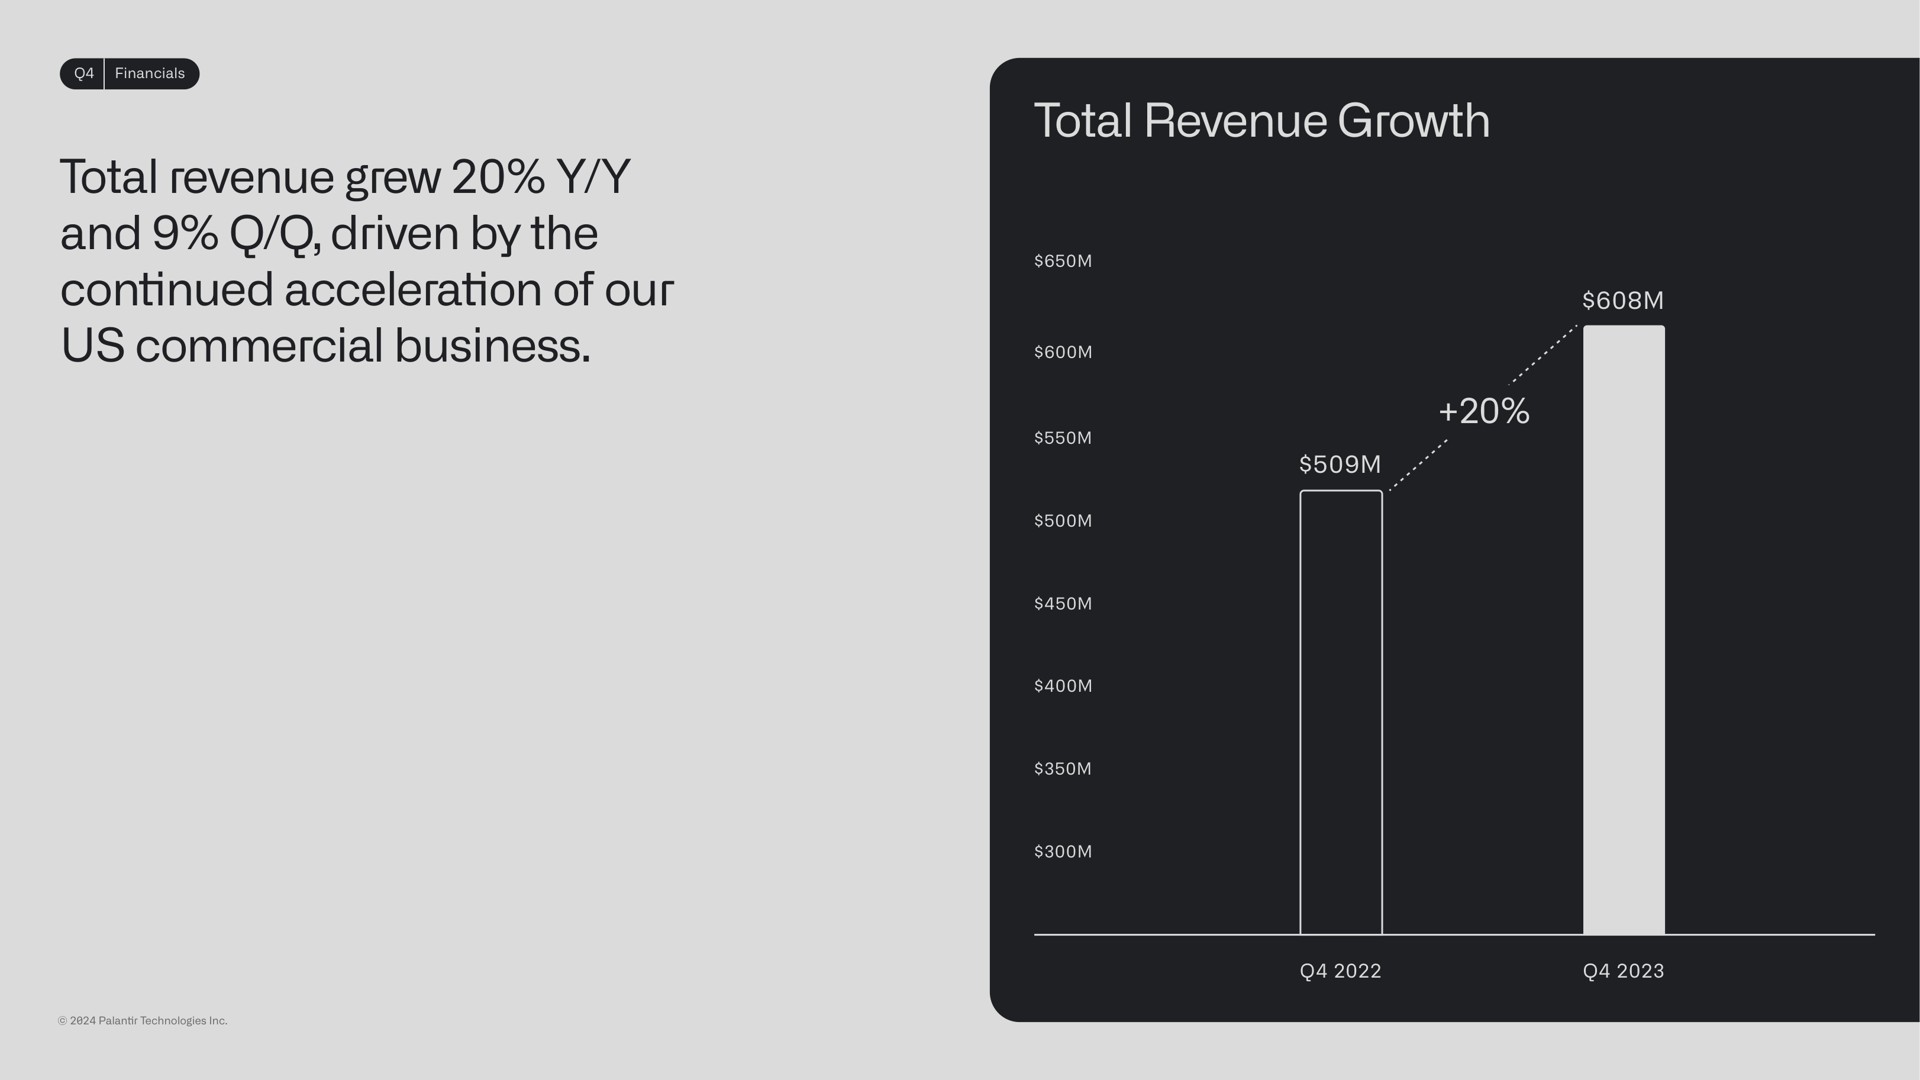 total revenue grew and driven by the continued acceleration of our us commercial business total revenue growth | Palantir